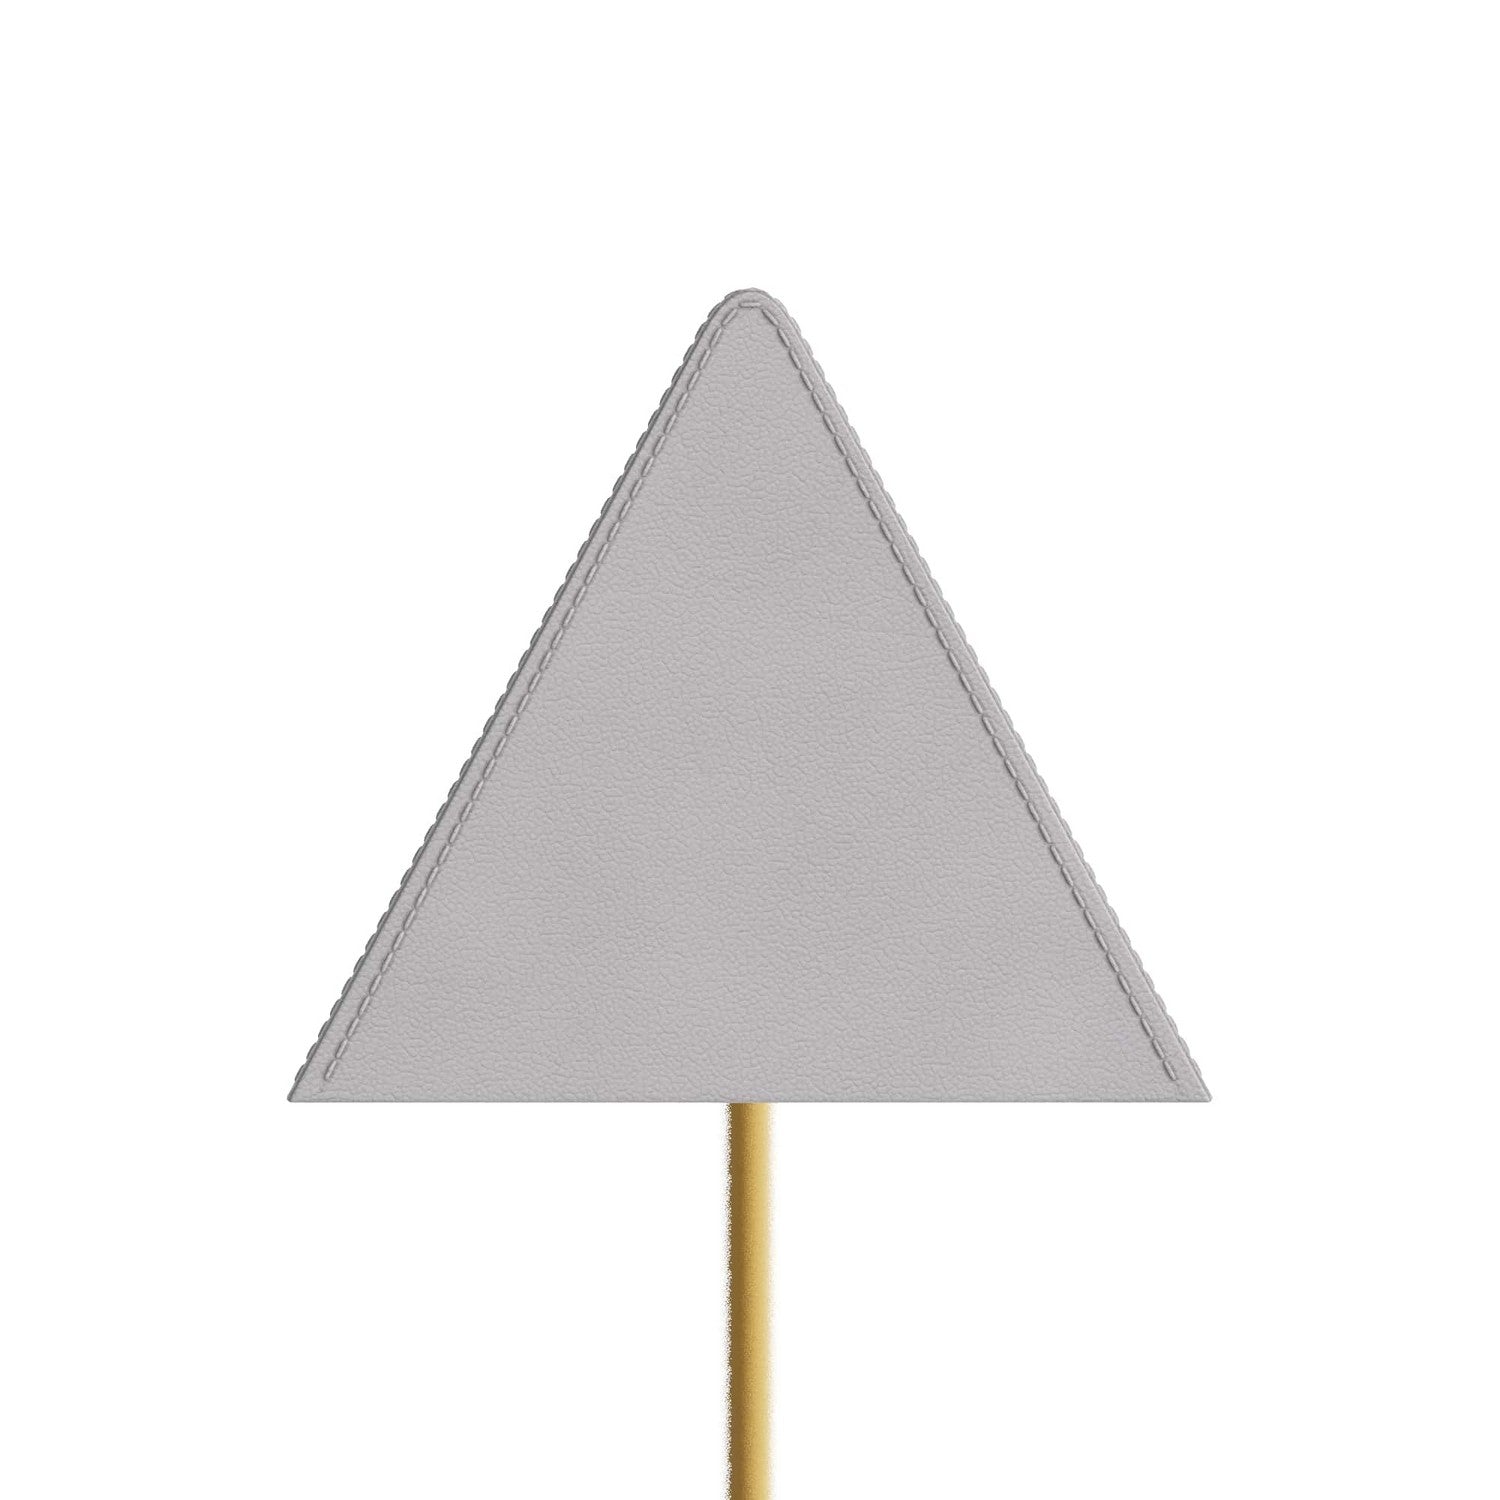 LED Floor Lamp from the Tyson collection in Antique Brass finish